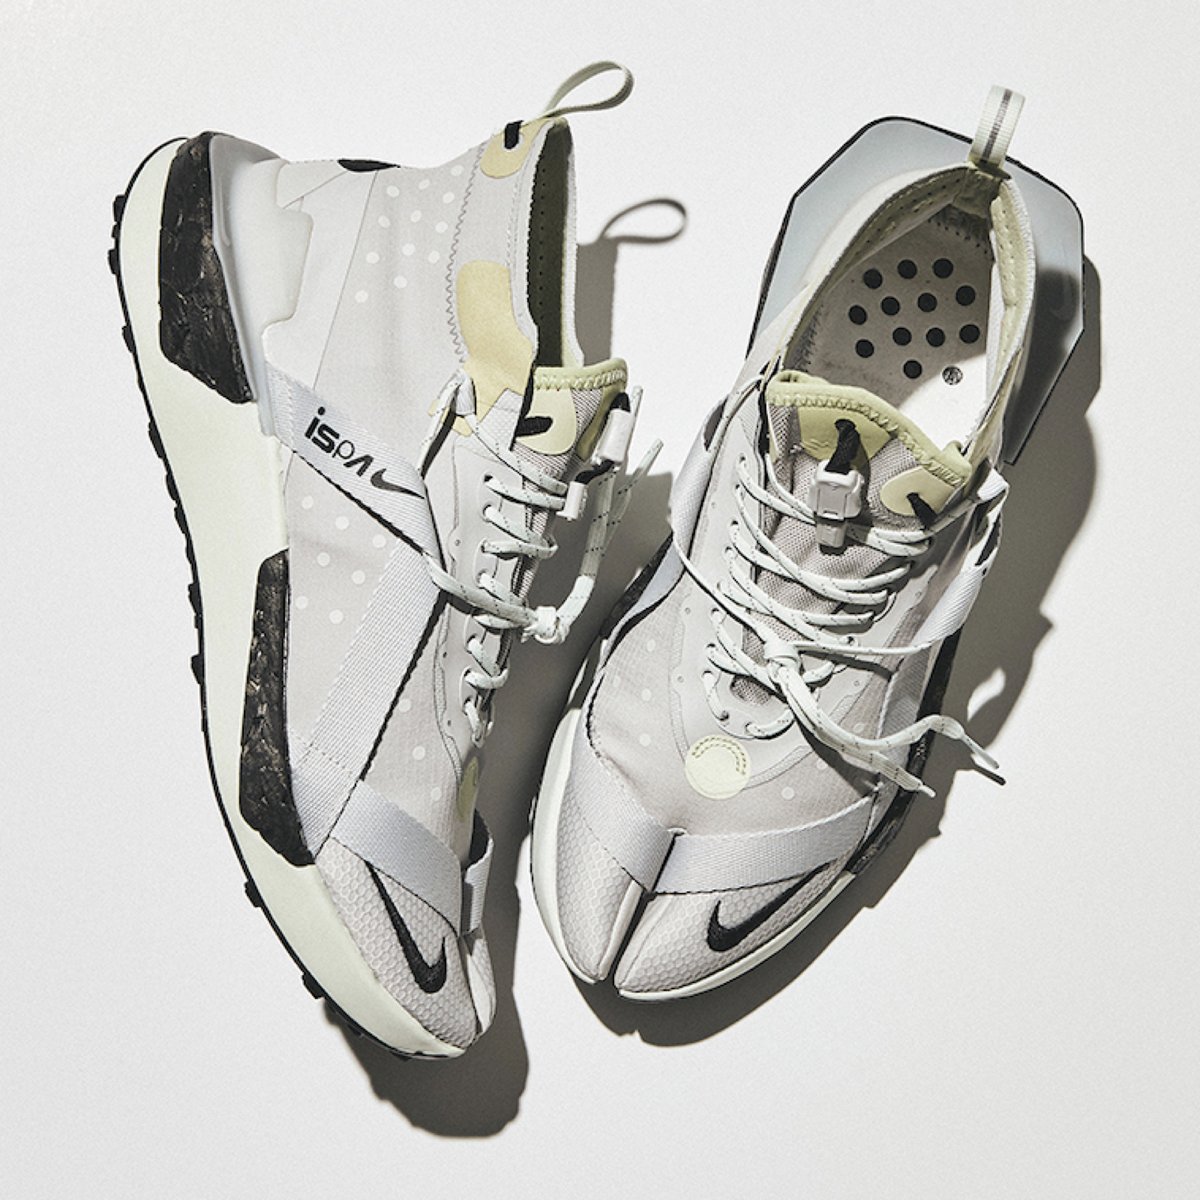 sivasdescalzo on Twitter: "Taking inspiration from the Tabi shoe, the Nike  ISPA Drifter was made to feel secure when you're on the move. It arrives  with a split toe, deconstructed upper and